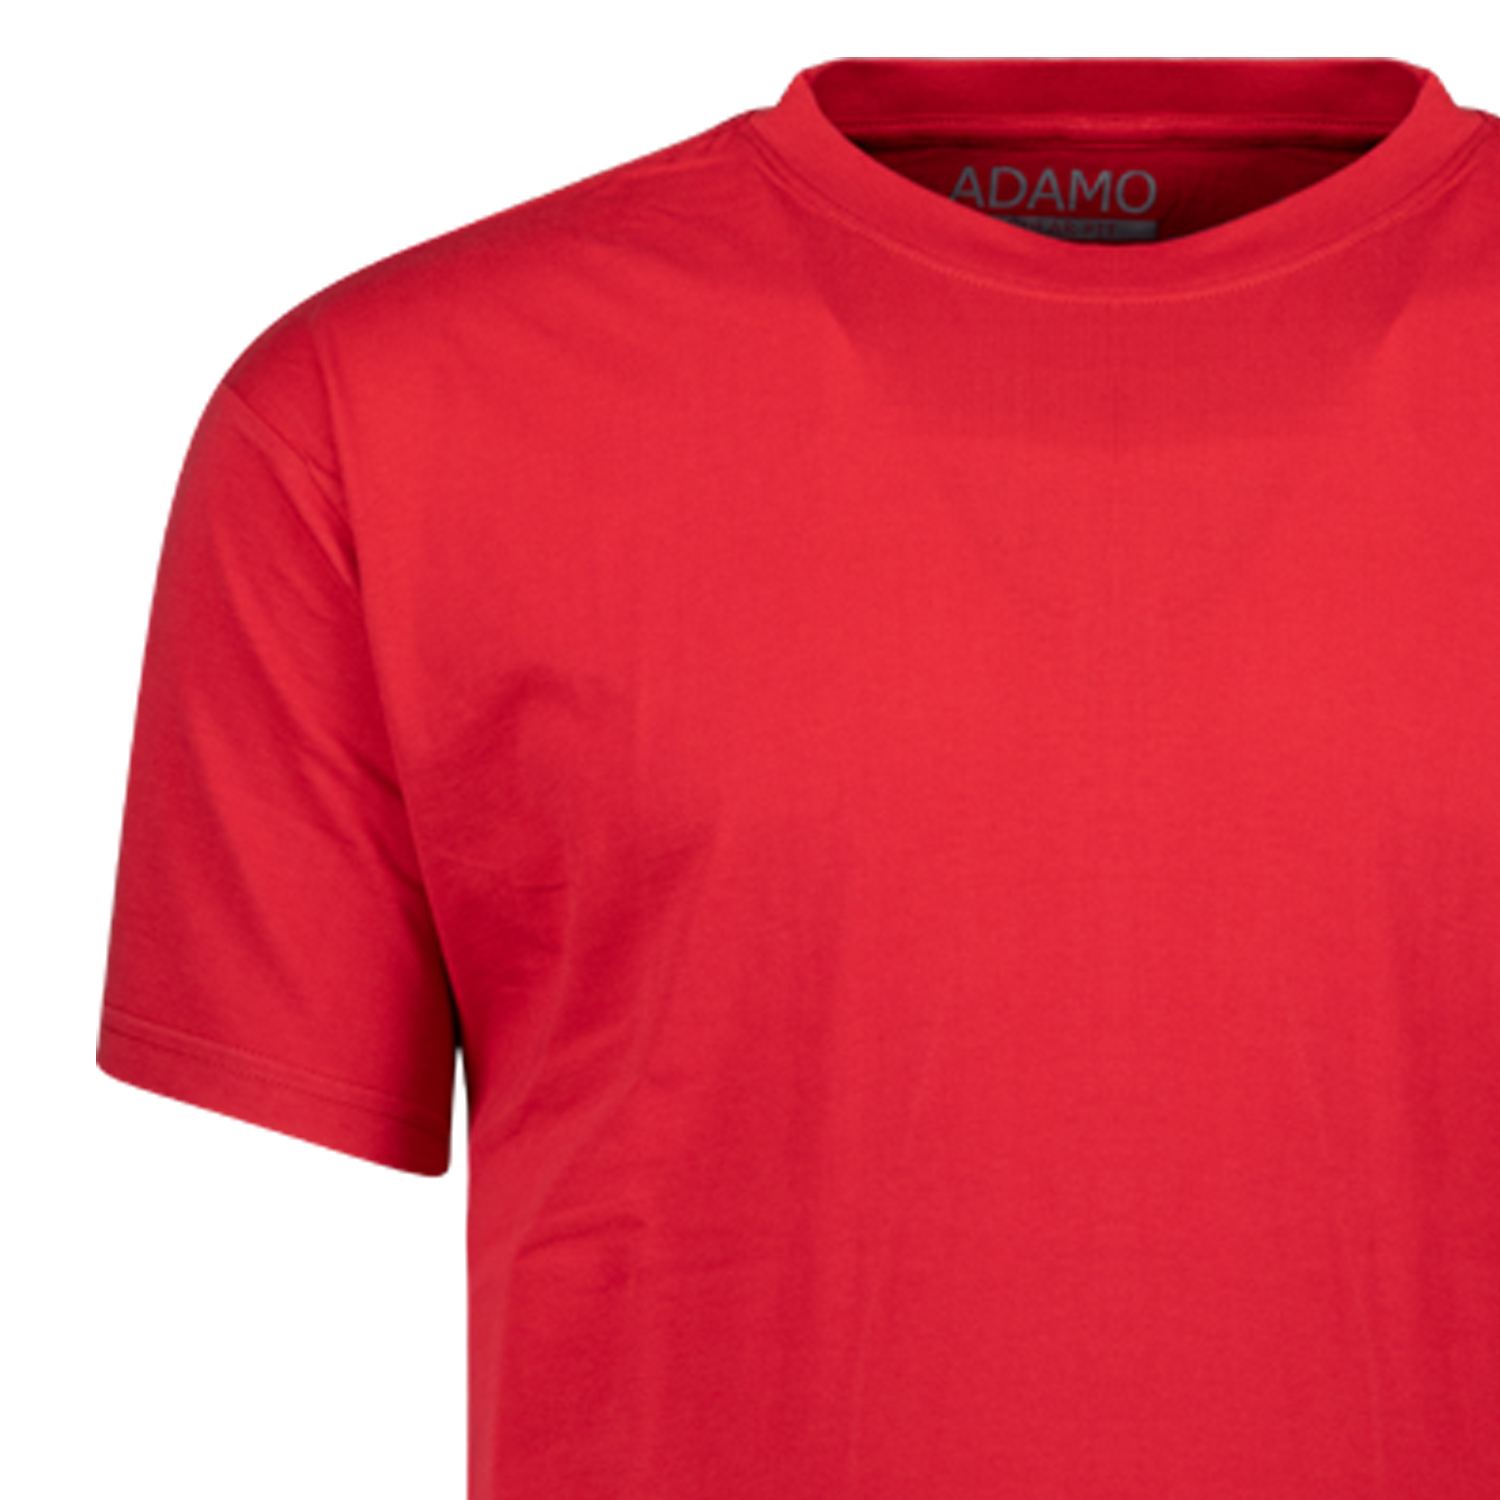 T-shirts in red series Kevin regular fit by Adamo for men up to oversize 10XL